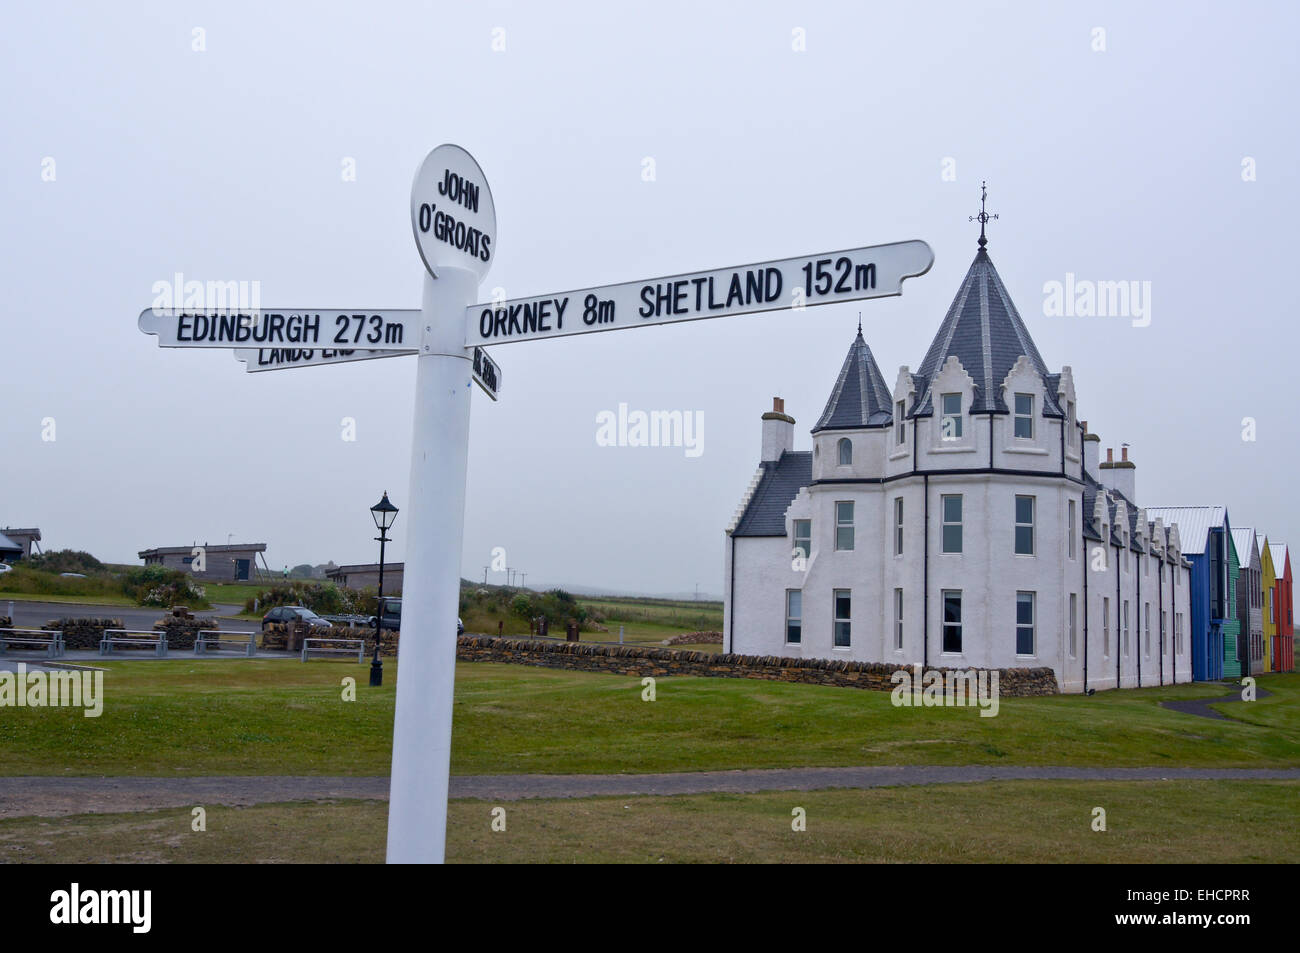 Sign showing distances to Land's End, Edinburgh, Orkney and Shetland, Inn at John O'Groats , Caithness, Scotland Stock Photo